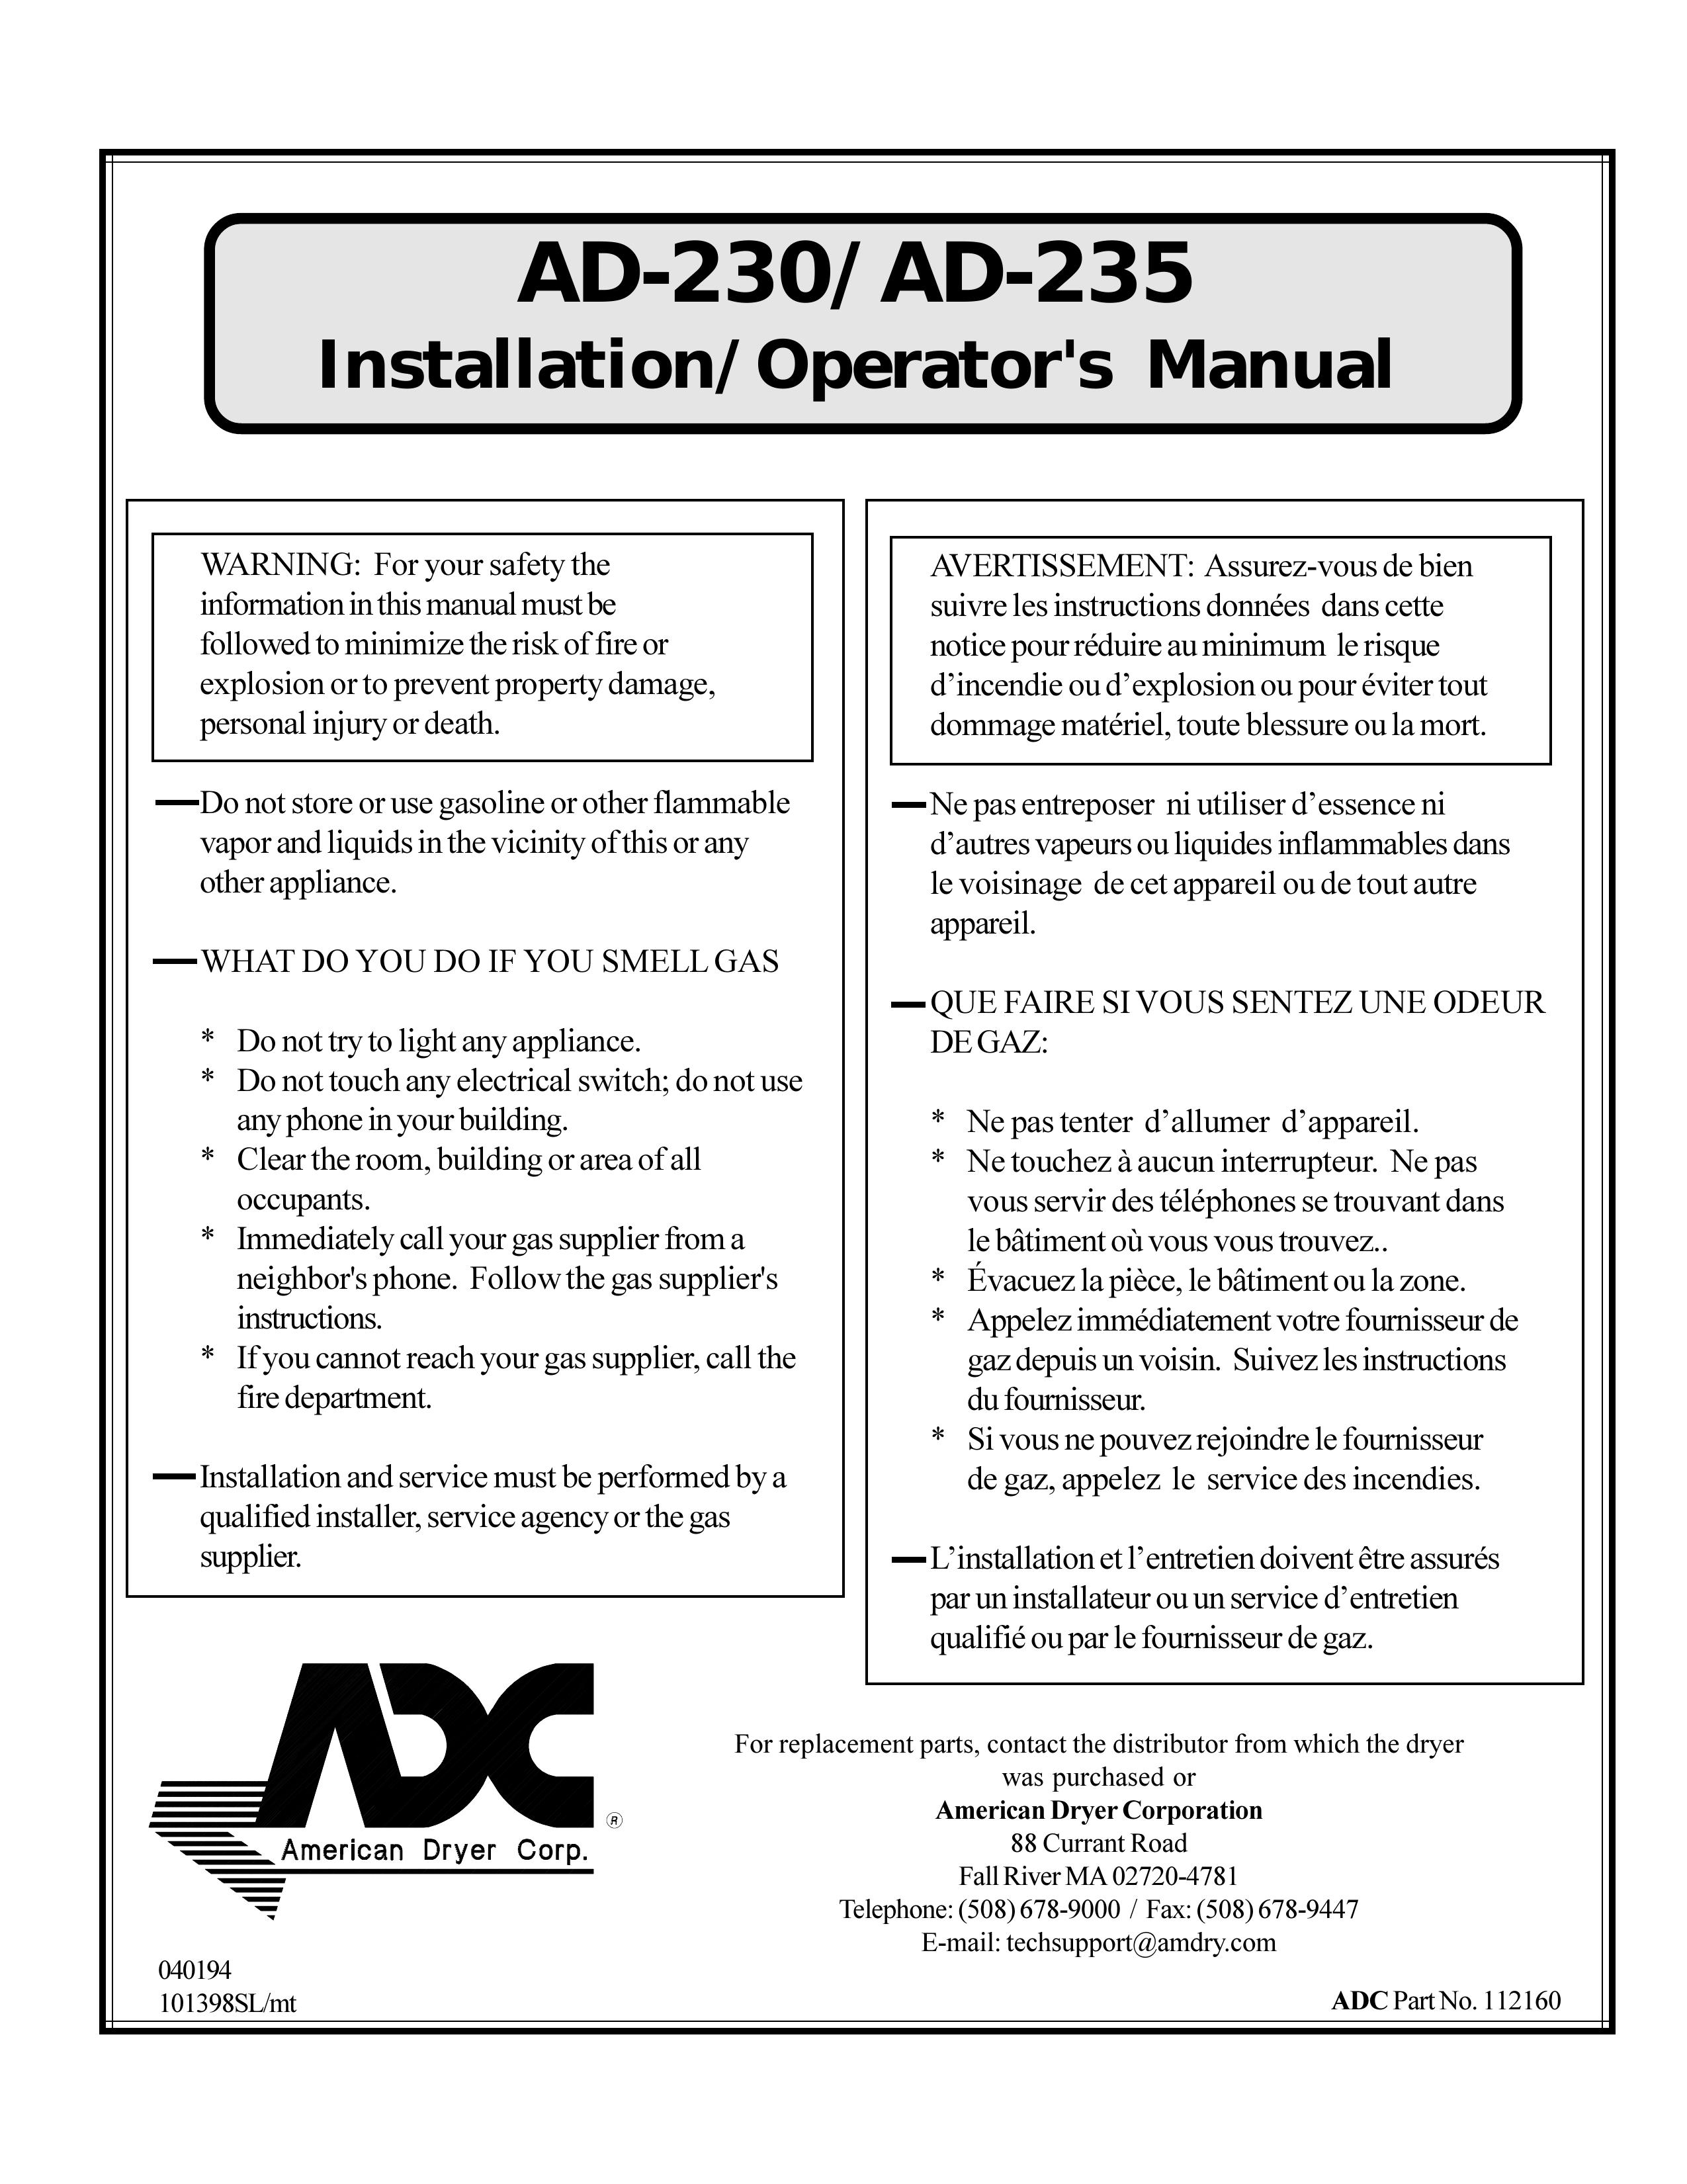 American Dryer Corp. AD-230 Clothes Dryer User Manual